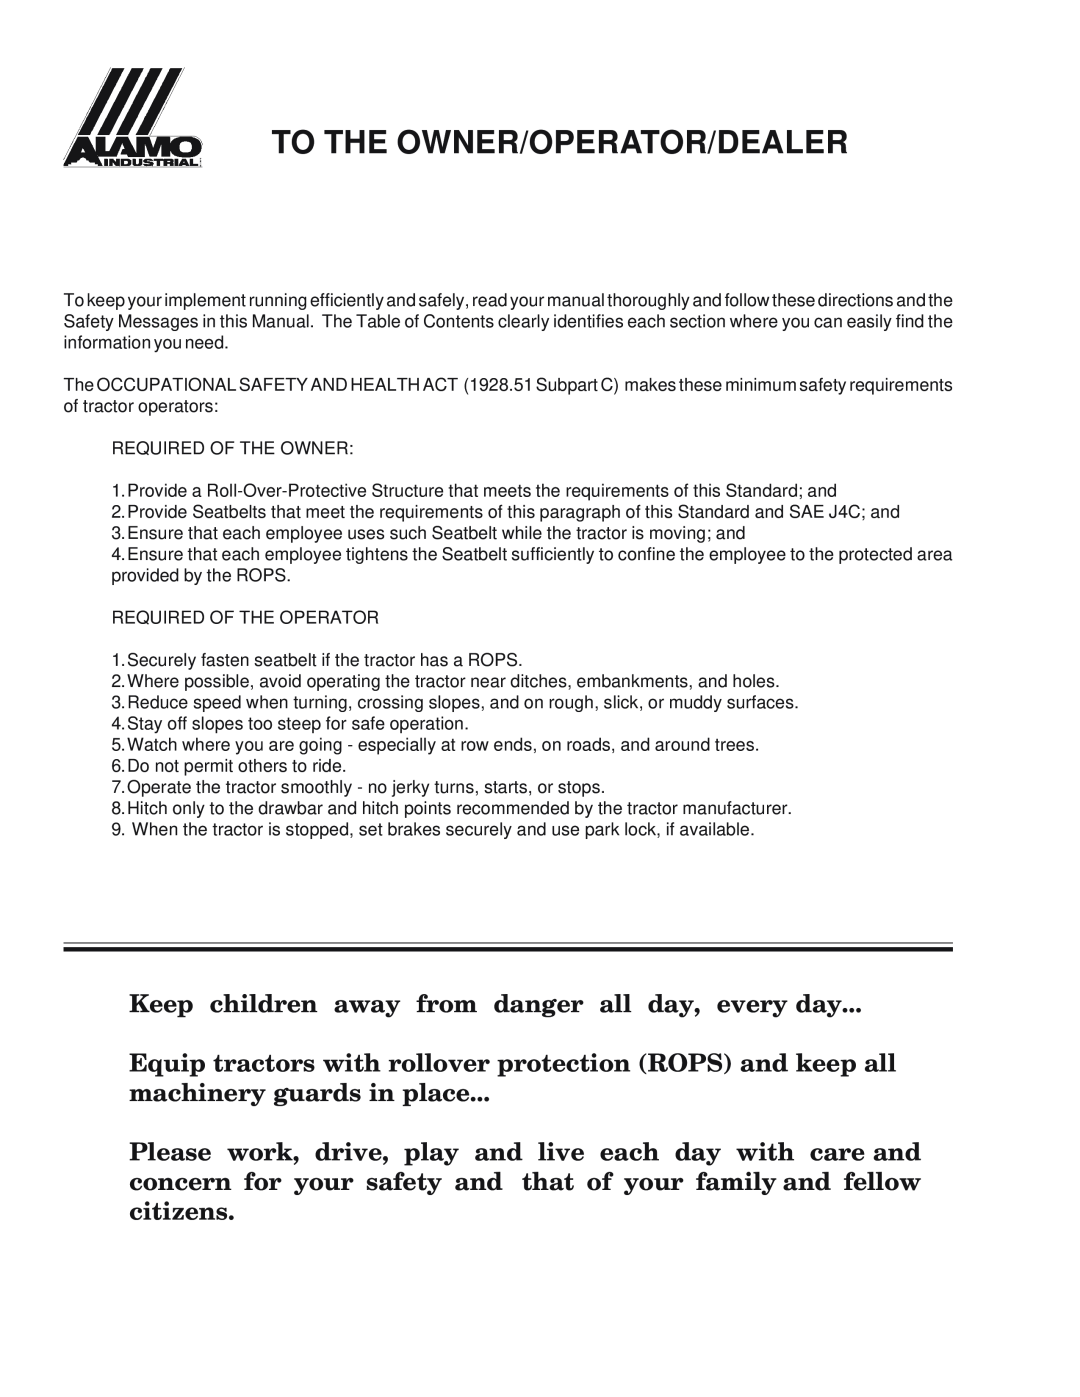 Alamo 66 manual To The Owner/Operator/Dealer, Keep children away from danger all day, every day, machinery guards in place 